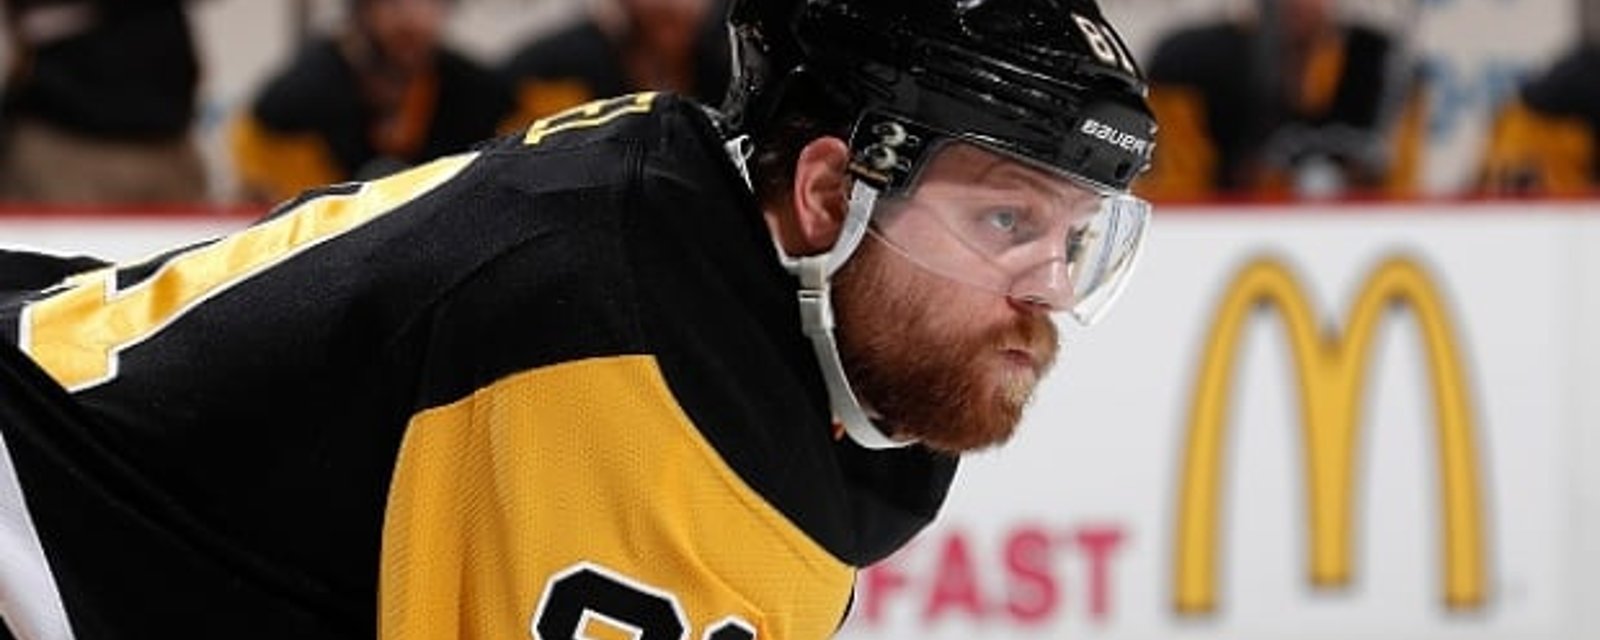 Kessel is excited about winning free Big Macs for Penguins fans! 